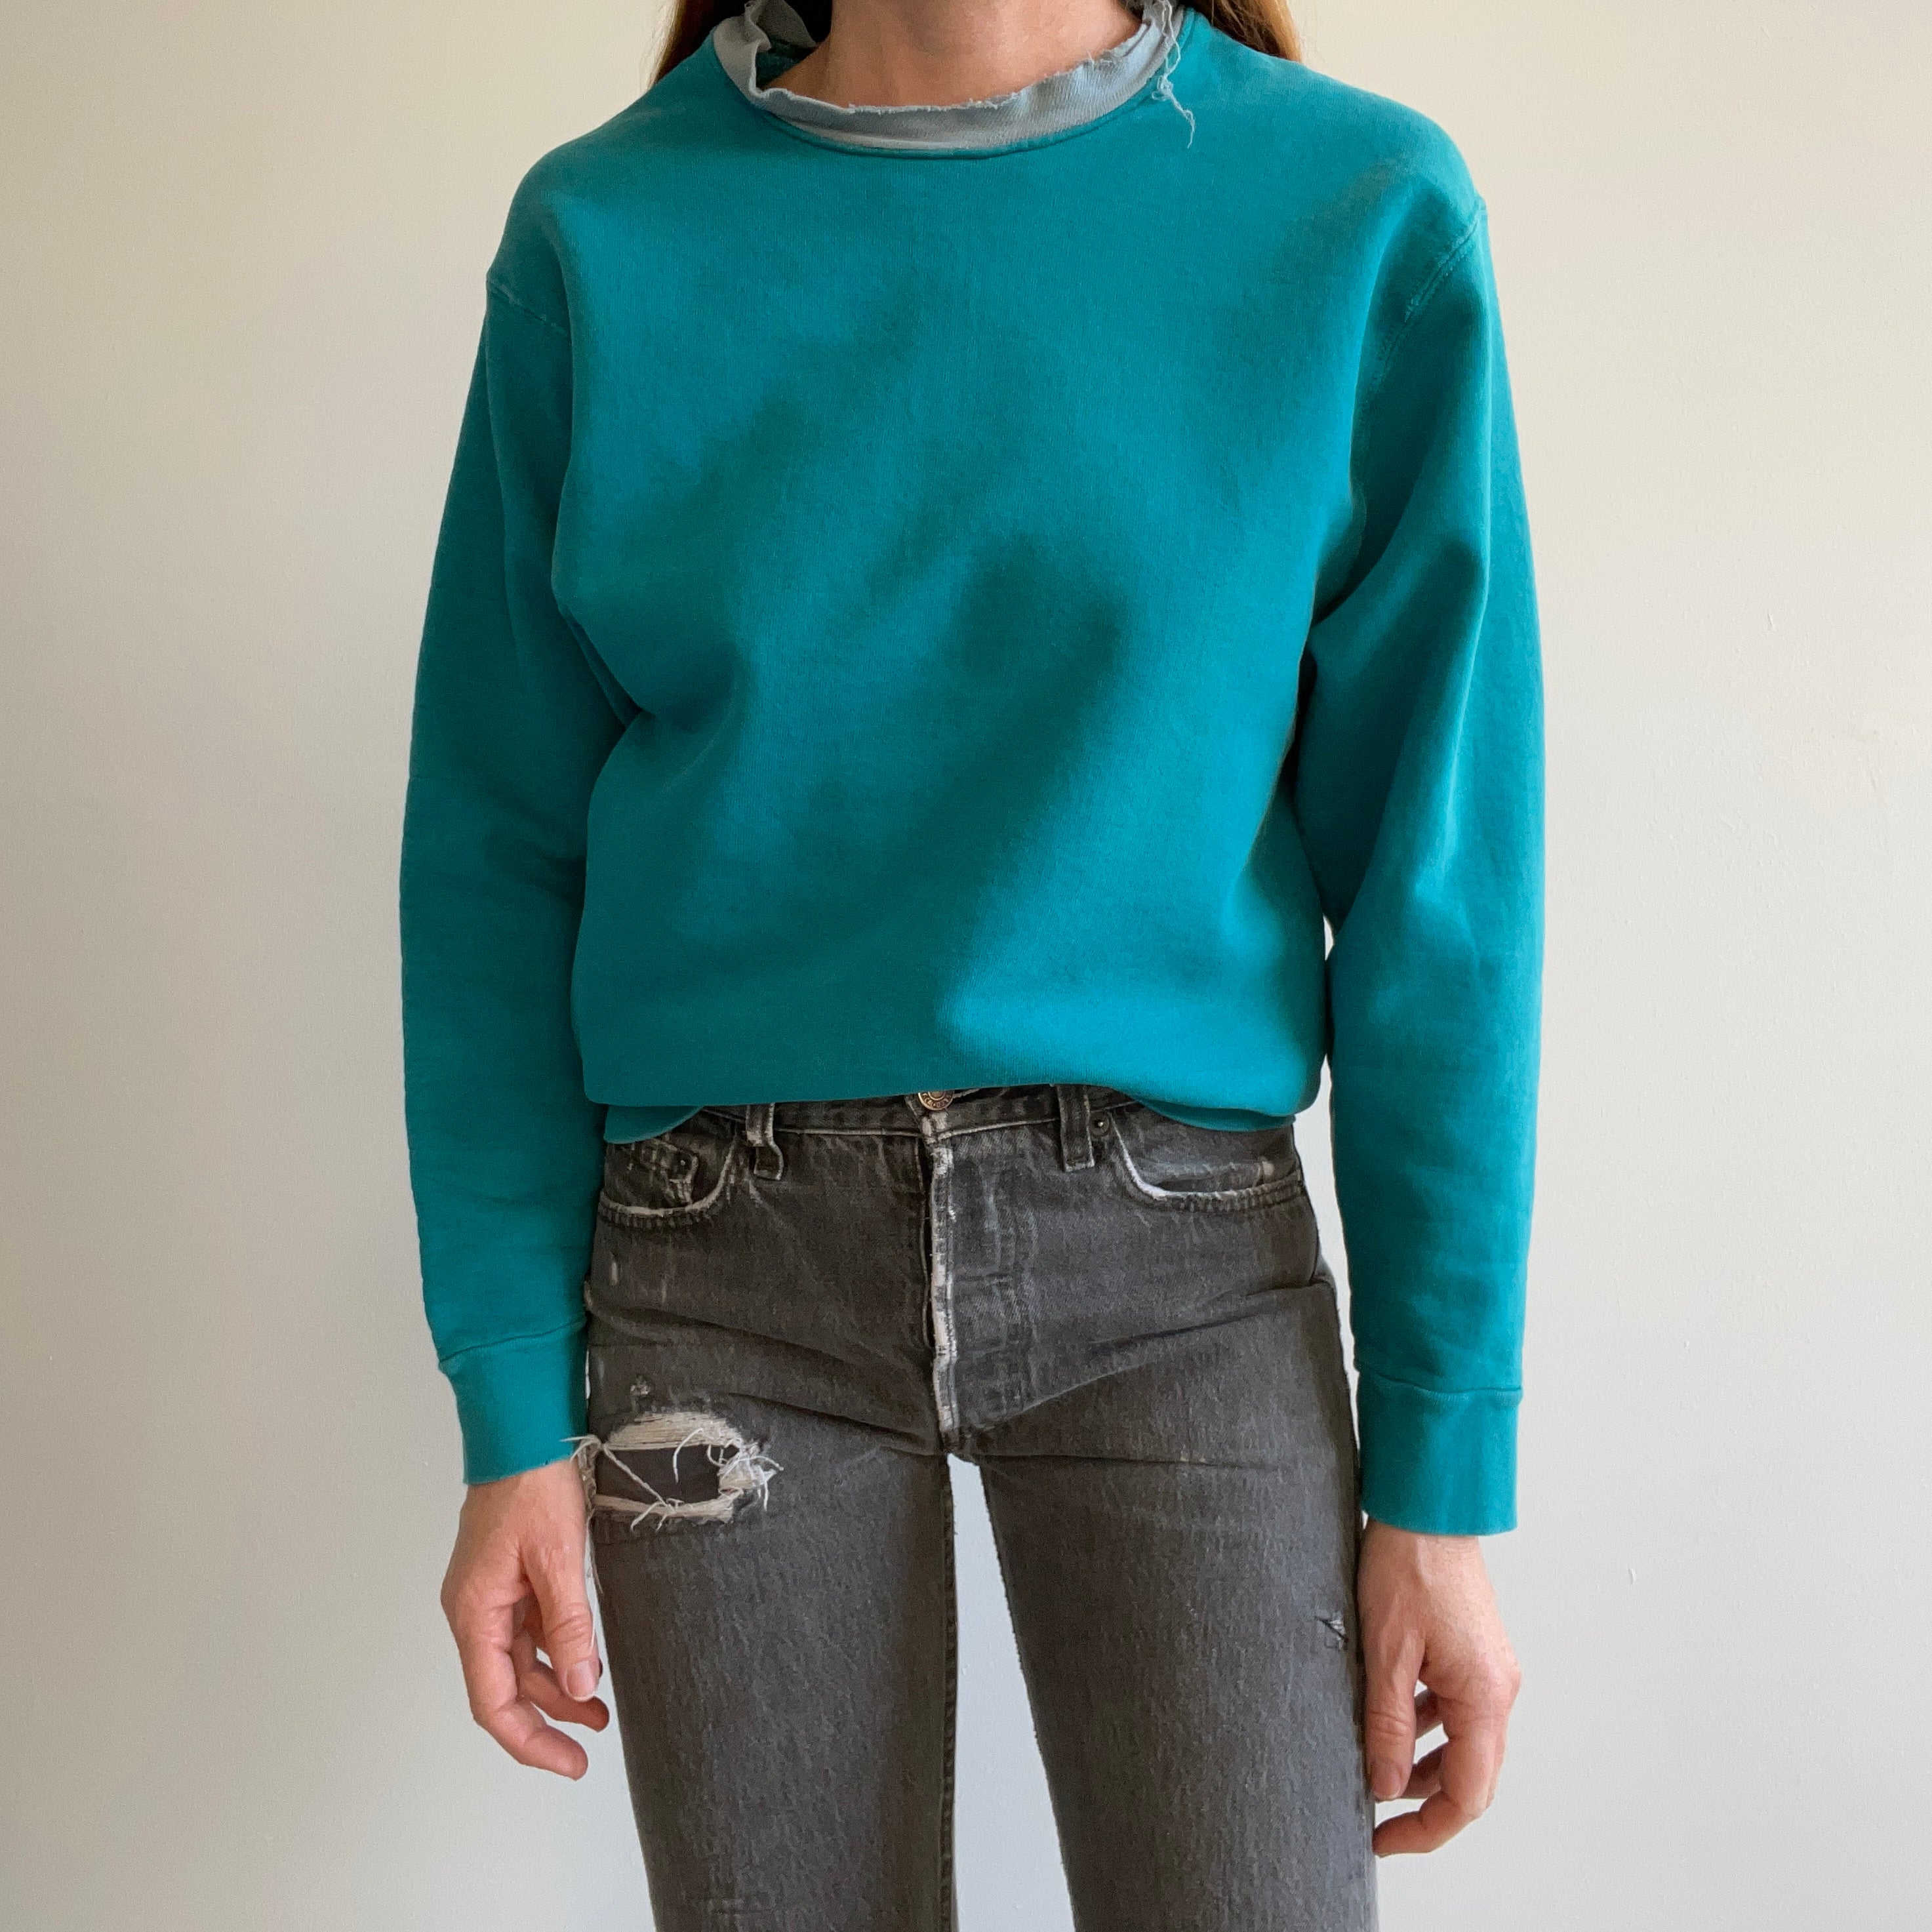 1980s Cotton Heavyweight Sweatshirt with a Completely Thrashed Collar